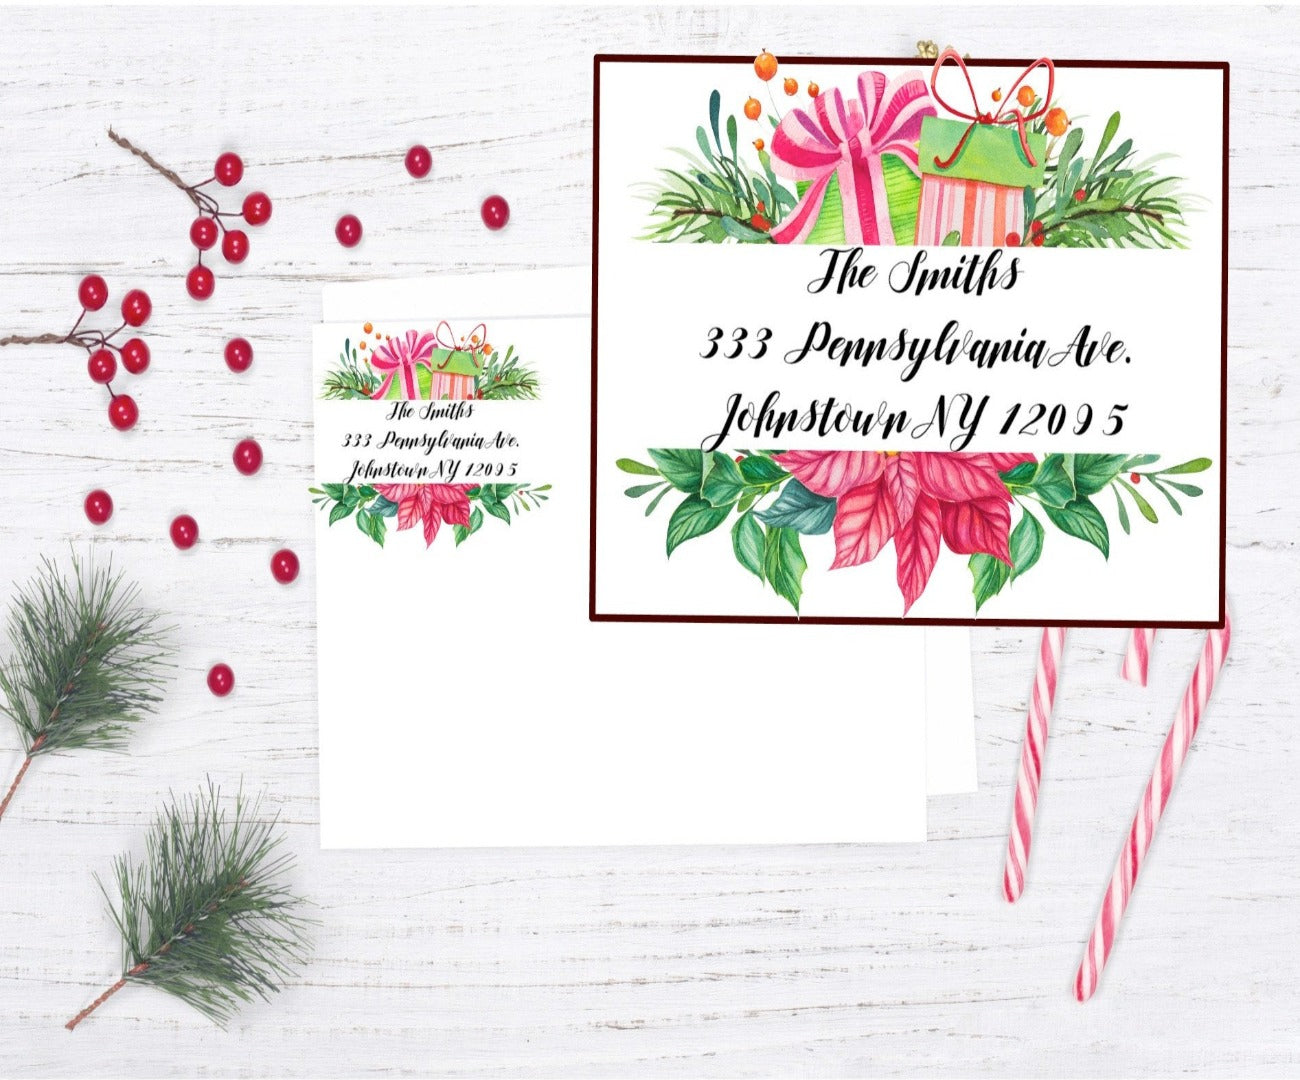 Personalized Christmas Return address labels